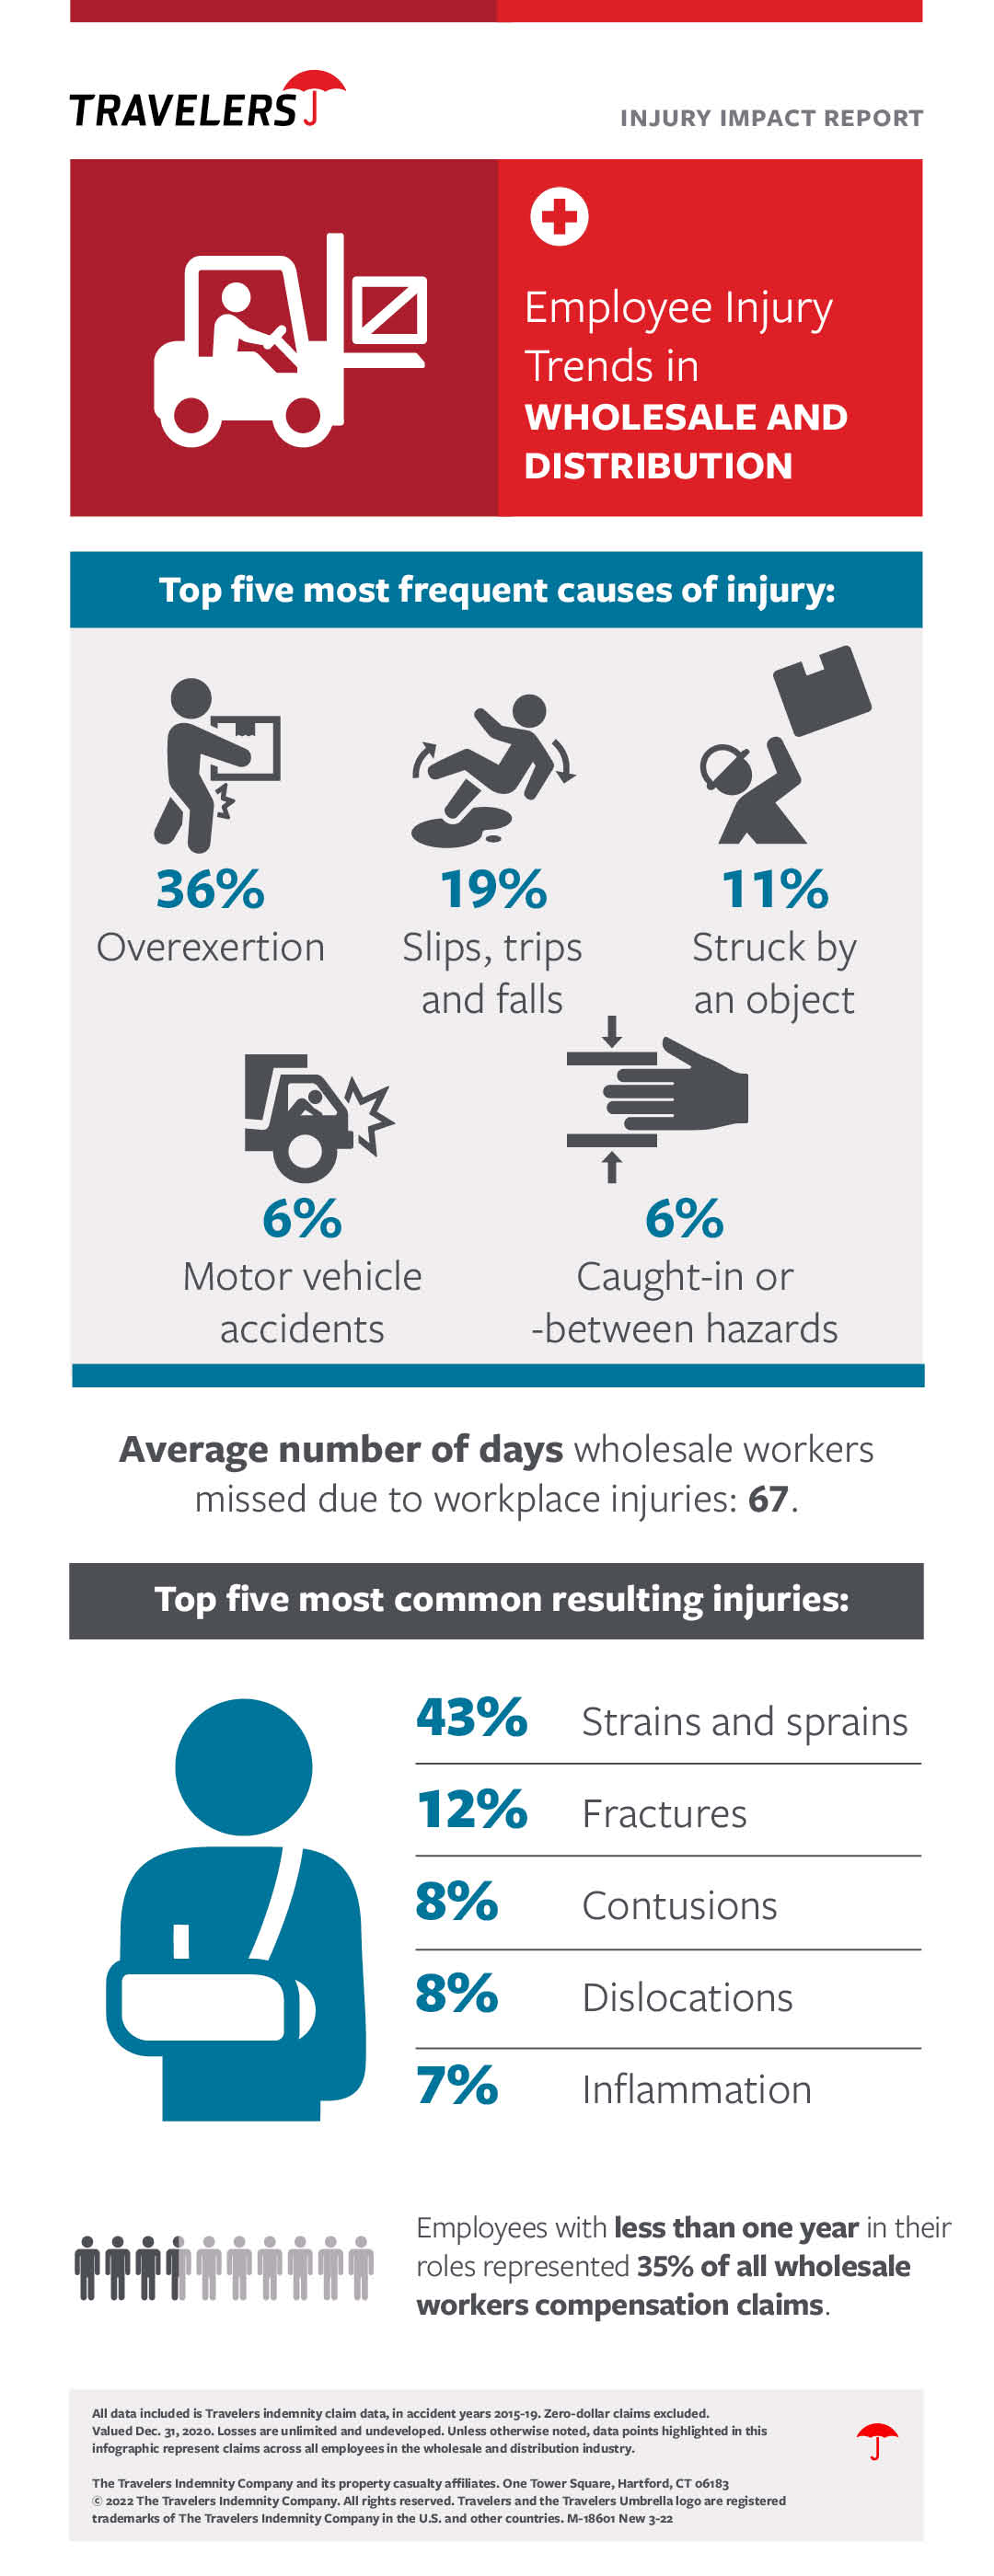 Employee Injury Trends in WHOLESALE AND DISTRIBUTION